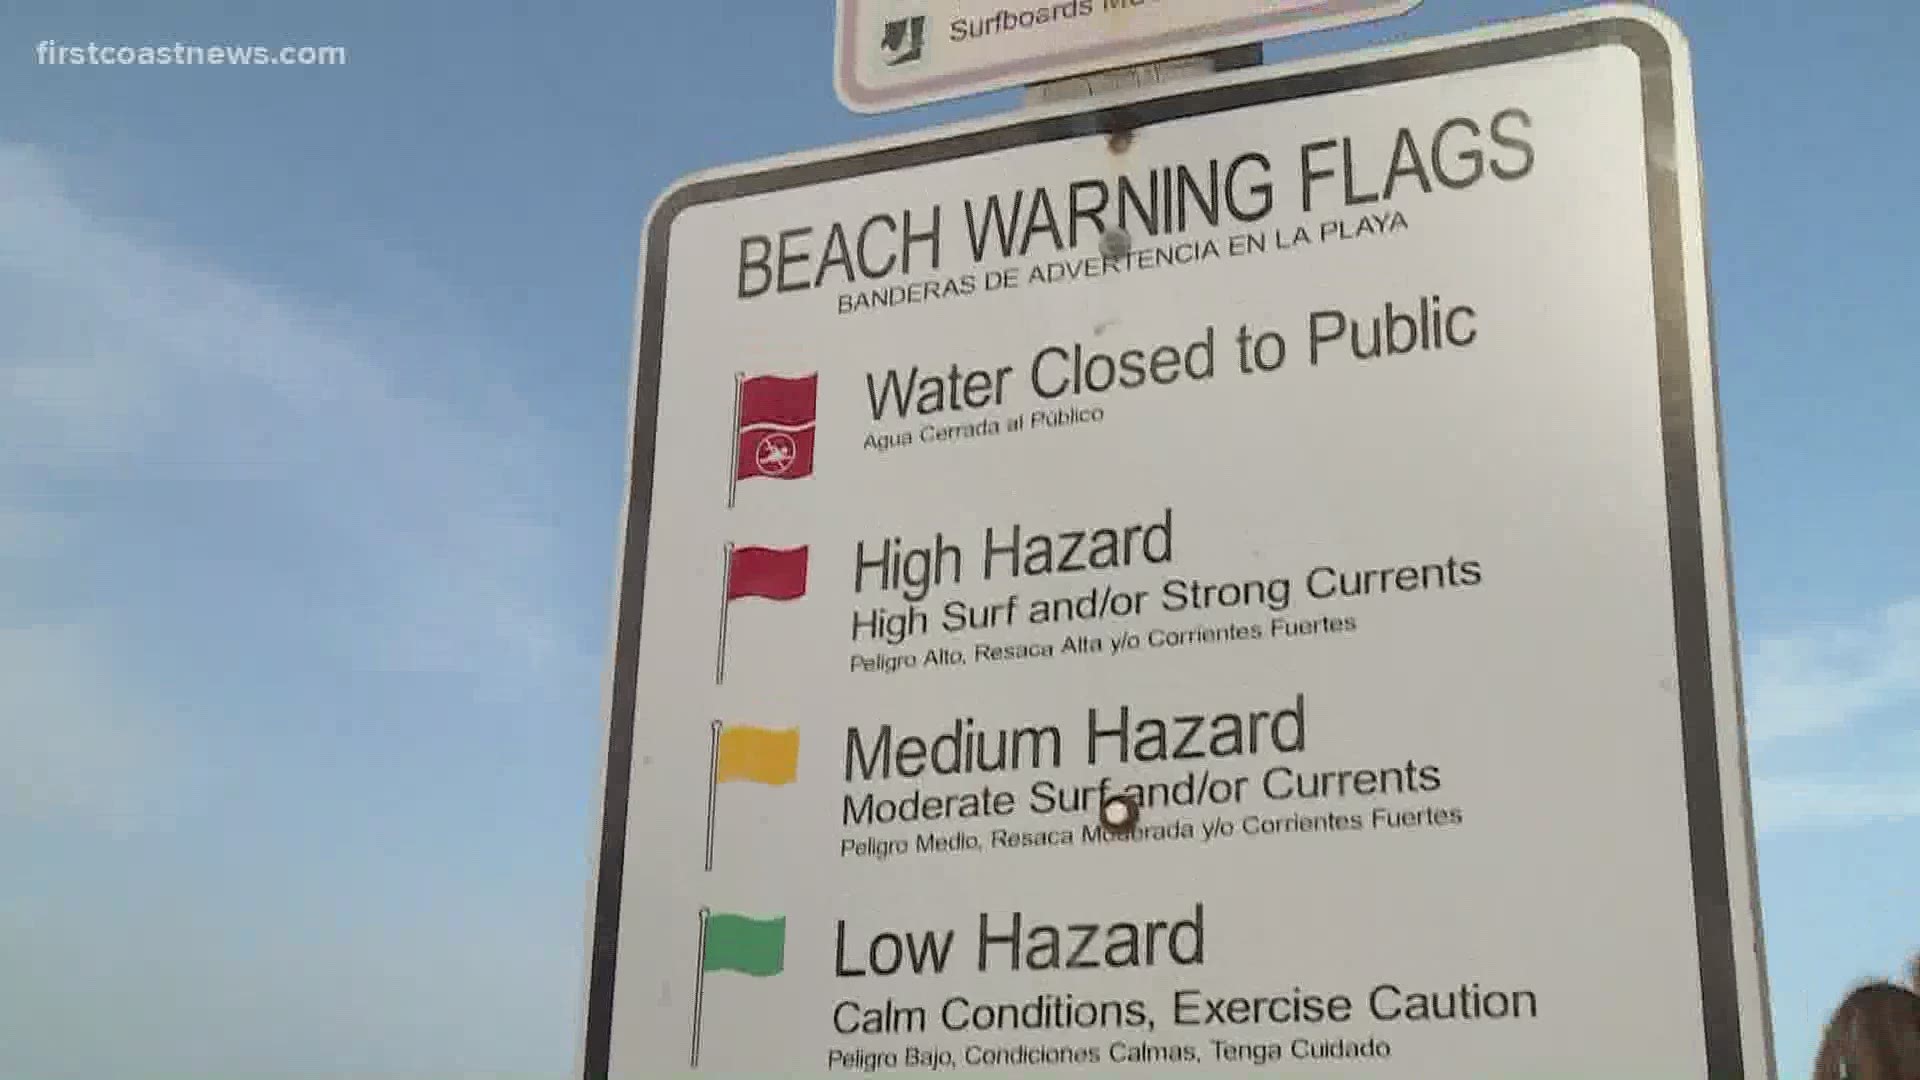 Dangerous ocean conditions, like rip currents, have already caused rescues at beaches today, according to officials. Conditions are expected to get worse.